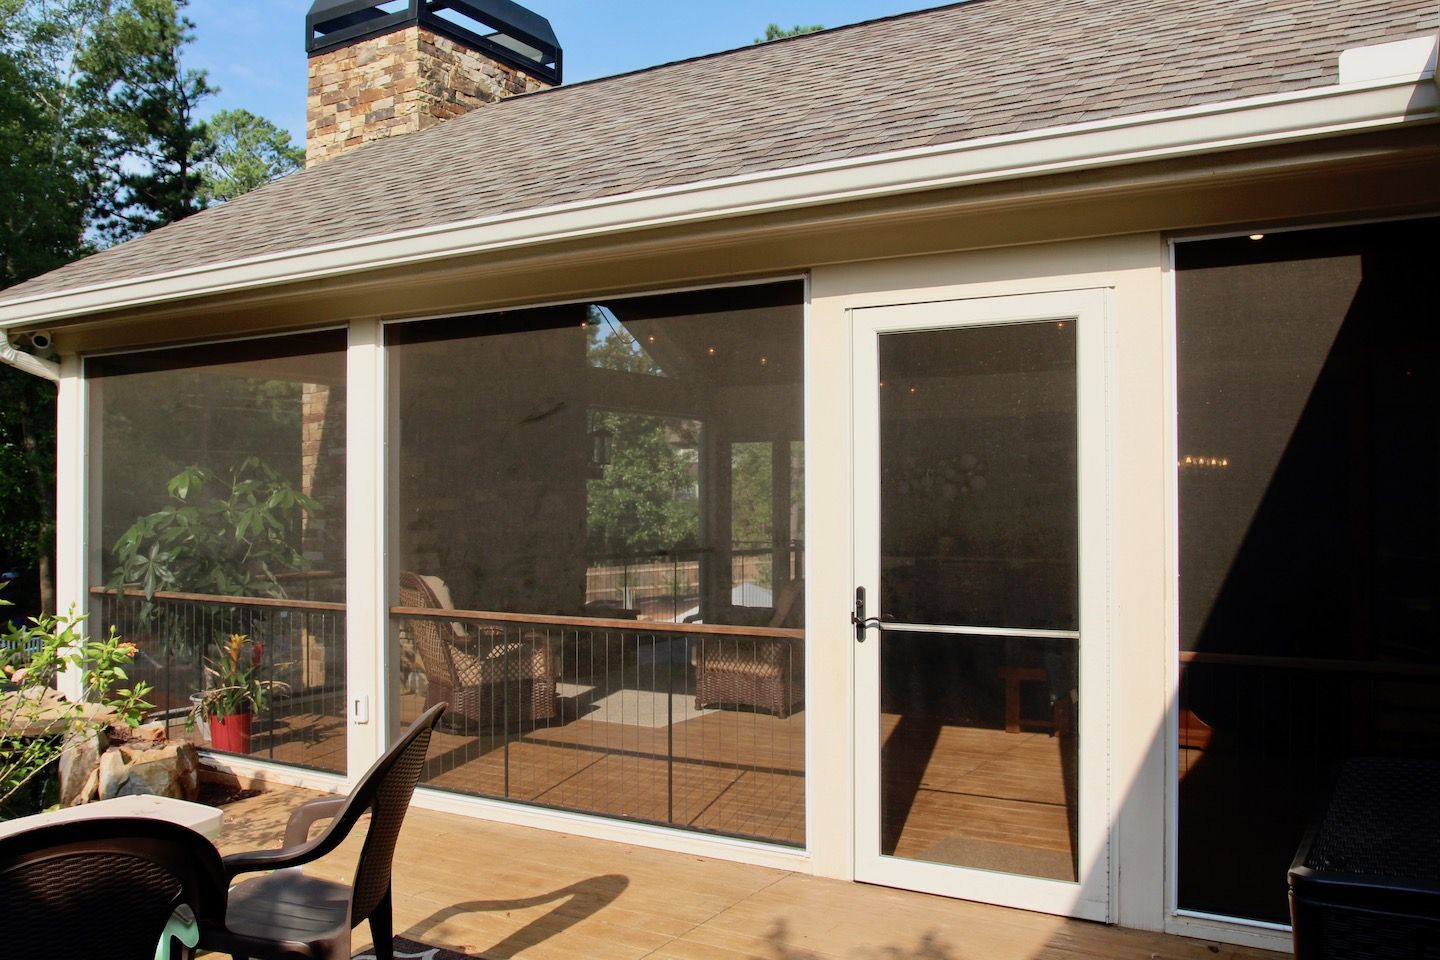 Sunroom Converted from a Screened Porch to a